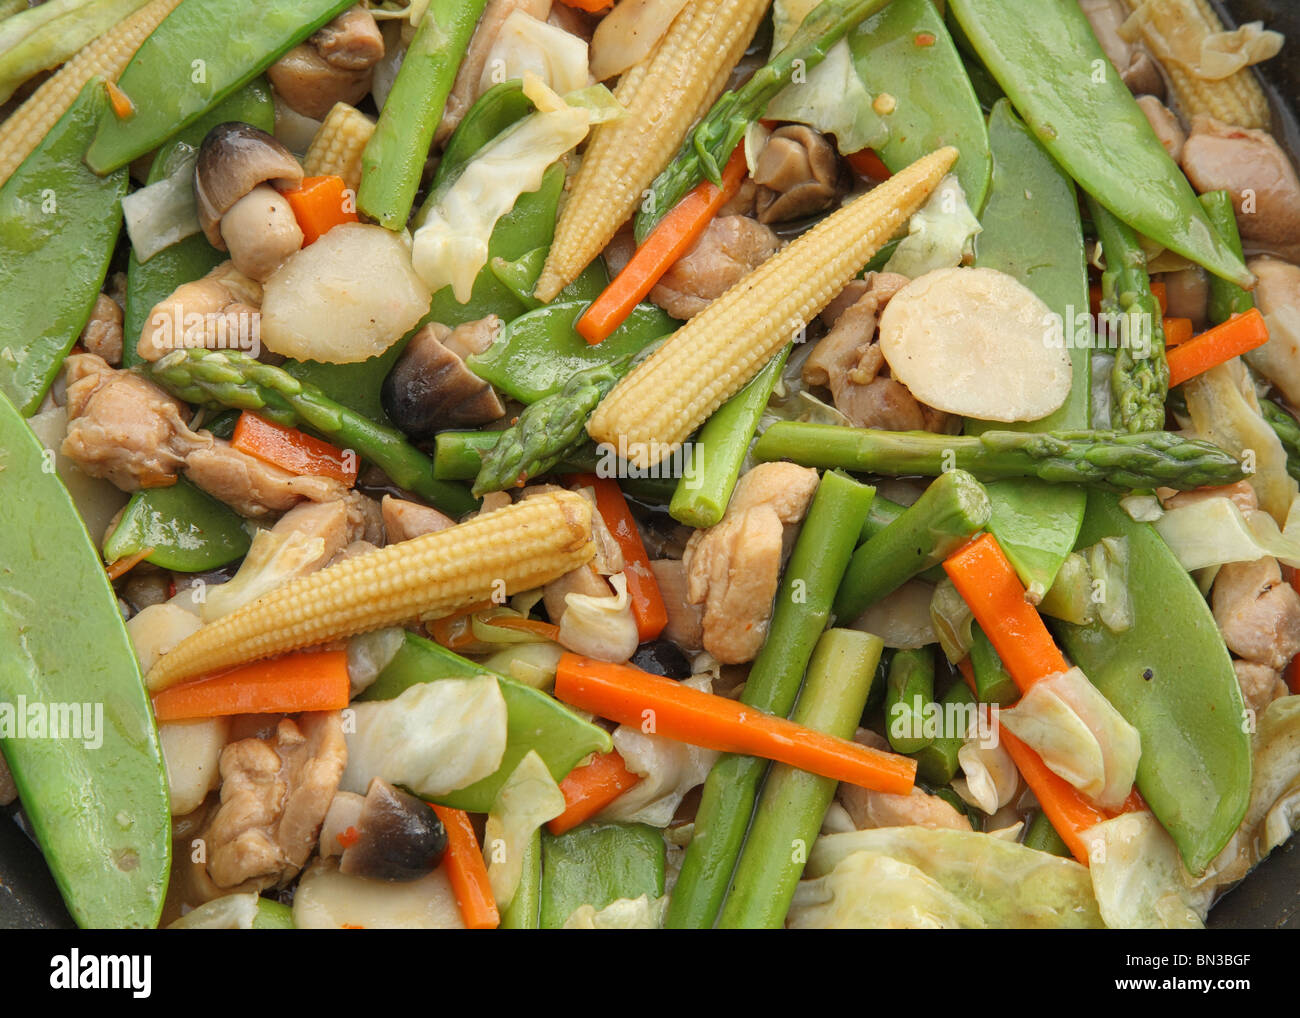 Chinese vegetable and chicken teriyaki stir fry in wok close-up Stock Photo